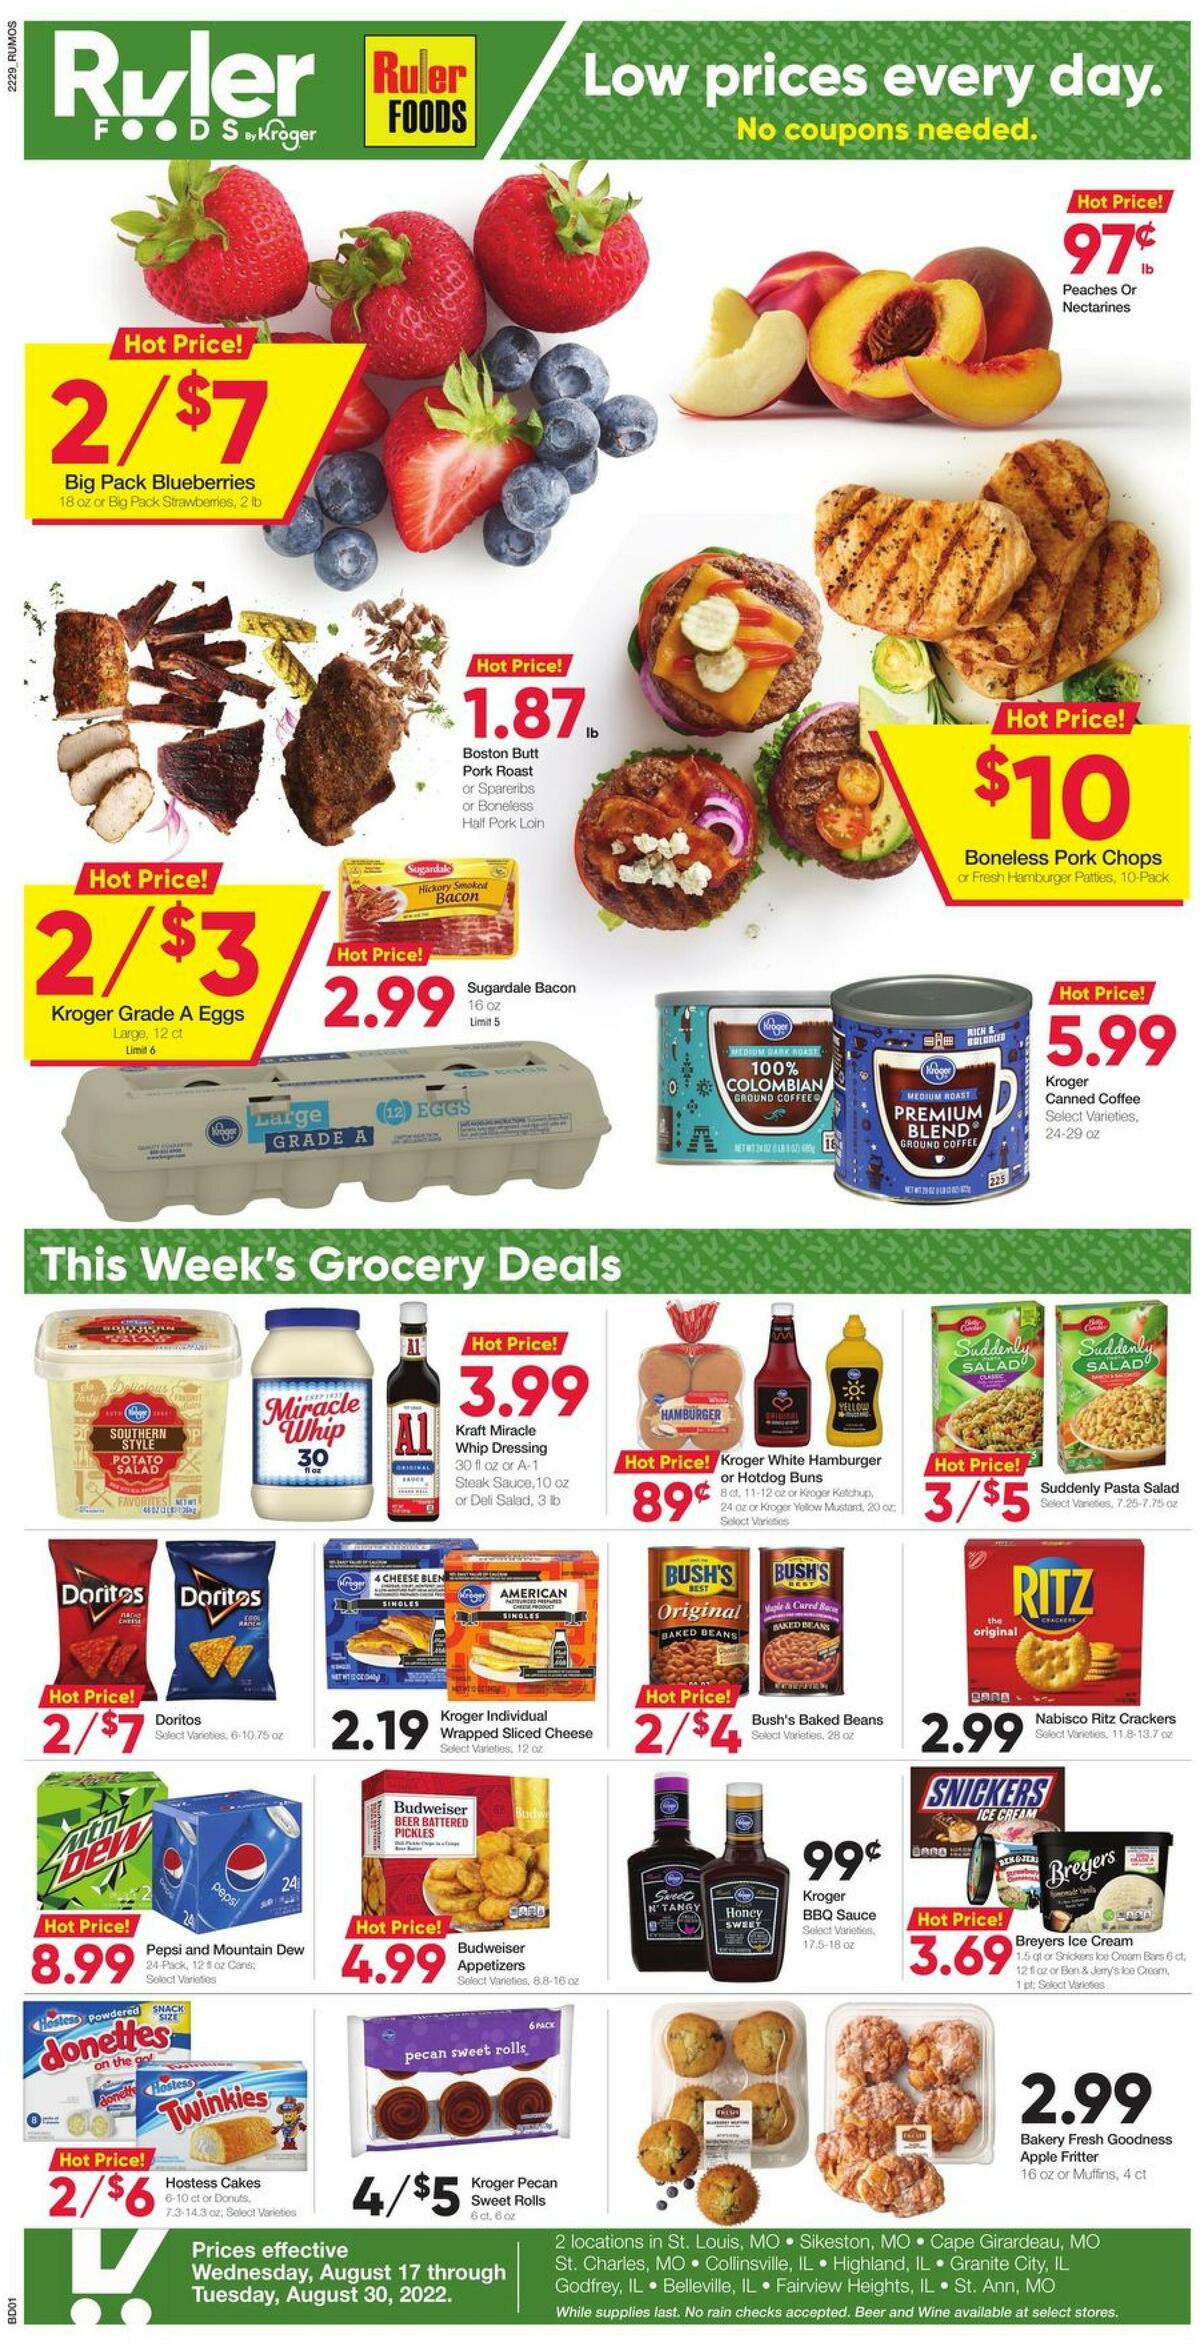 Ruler Foods Weekly Ad from August 17